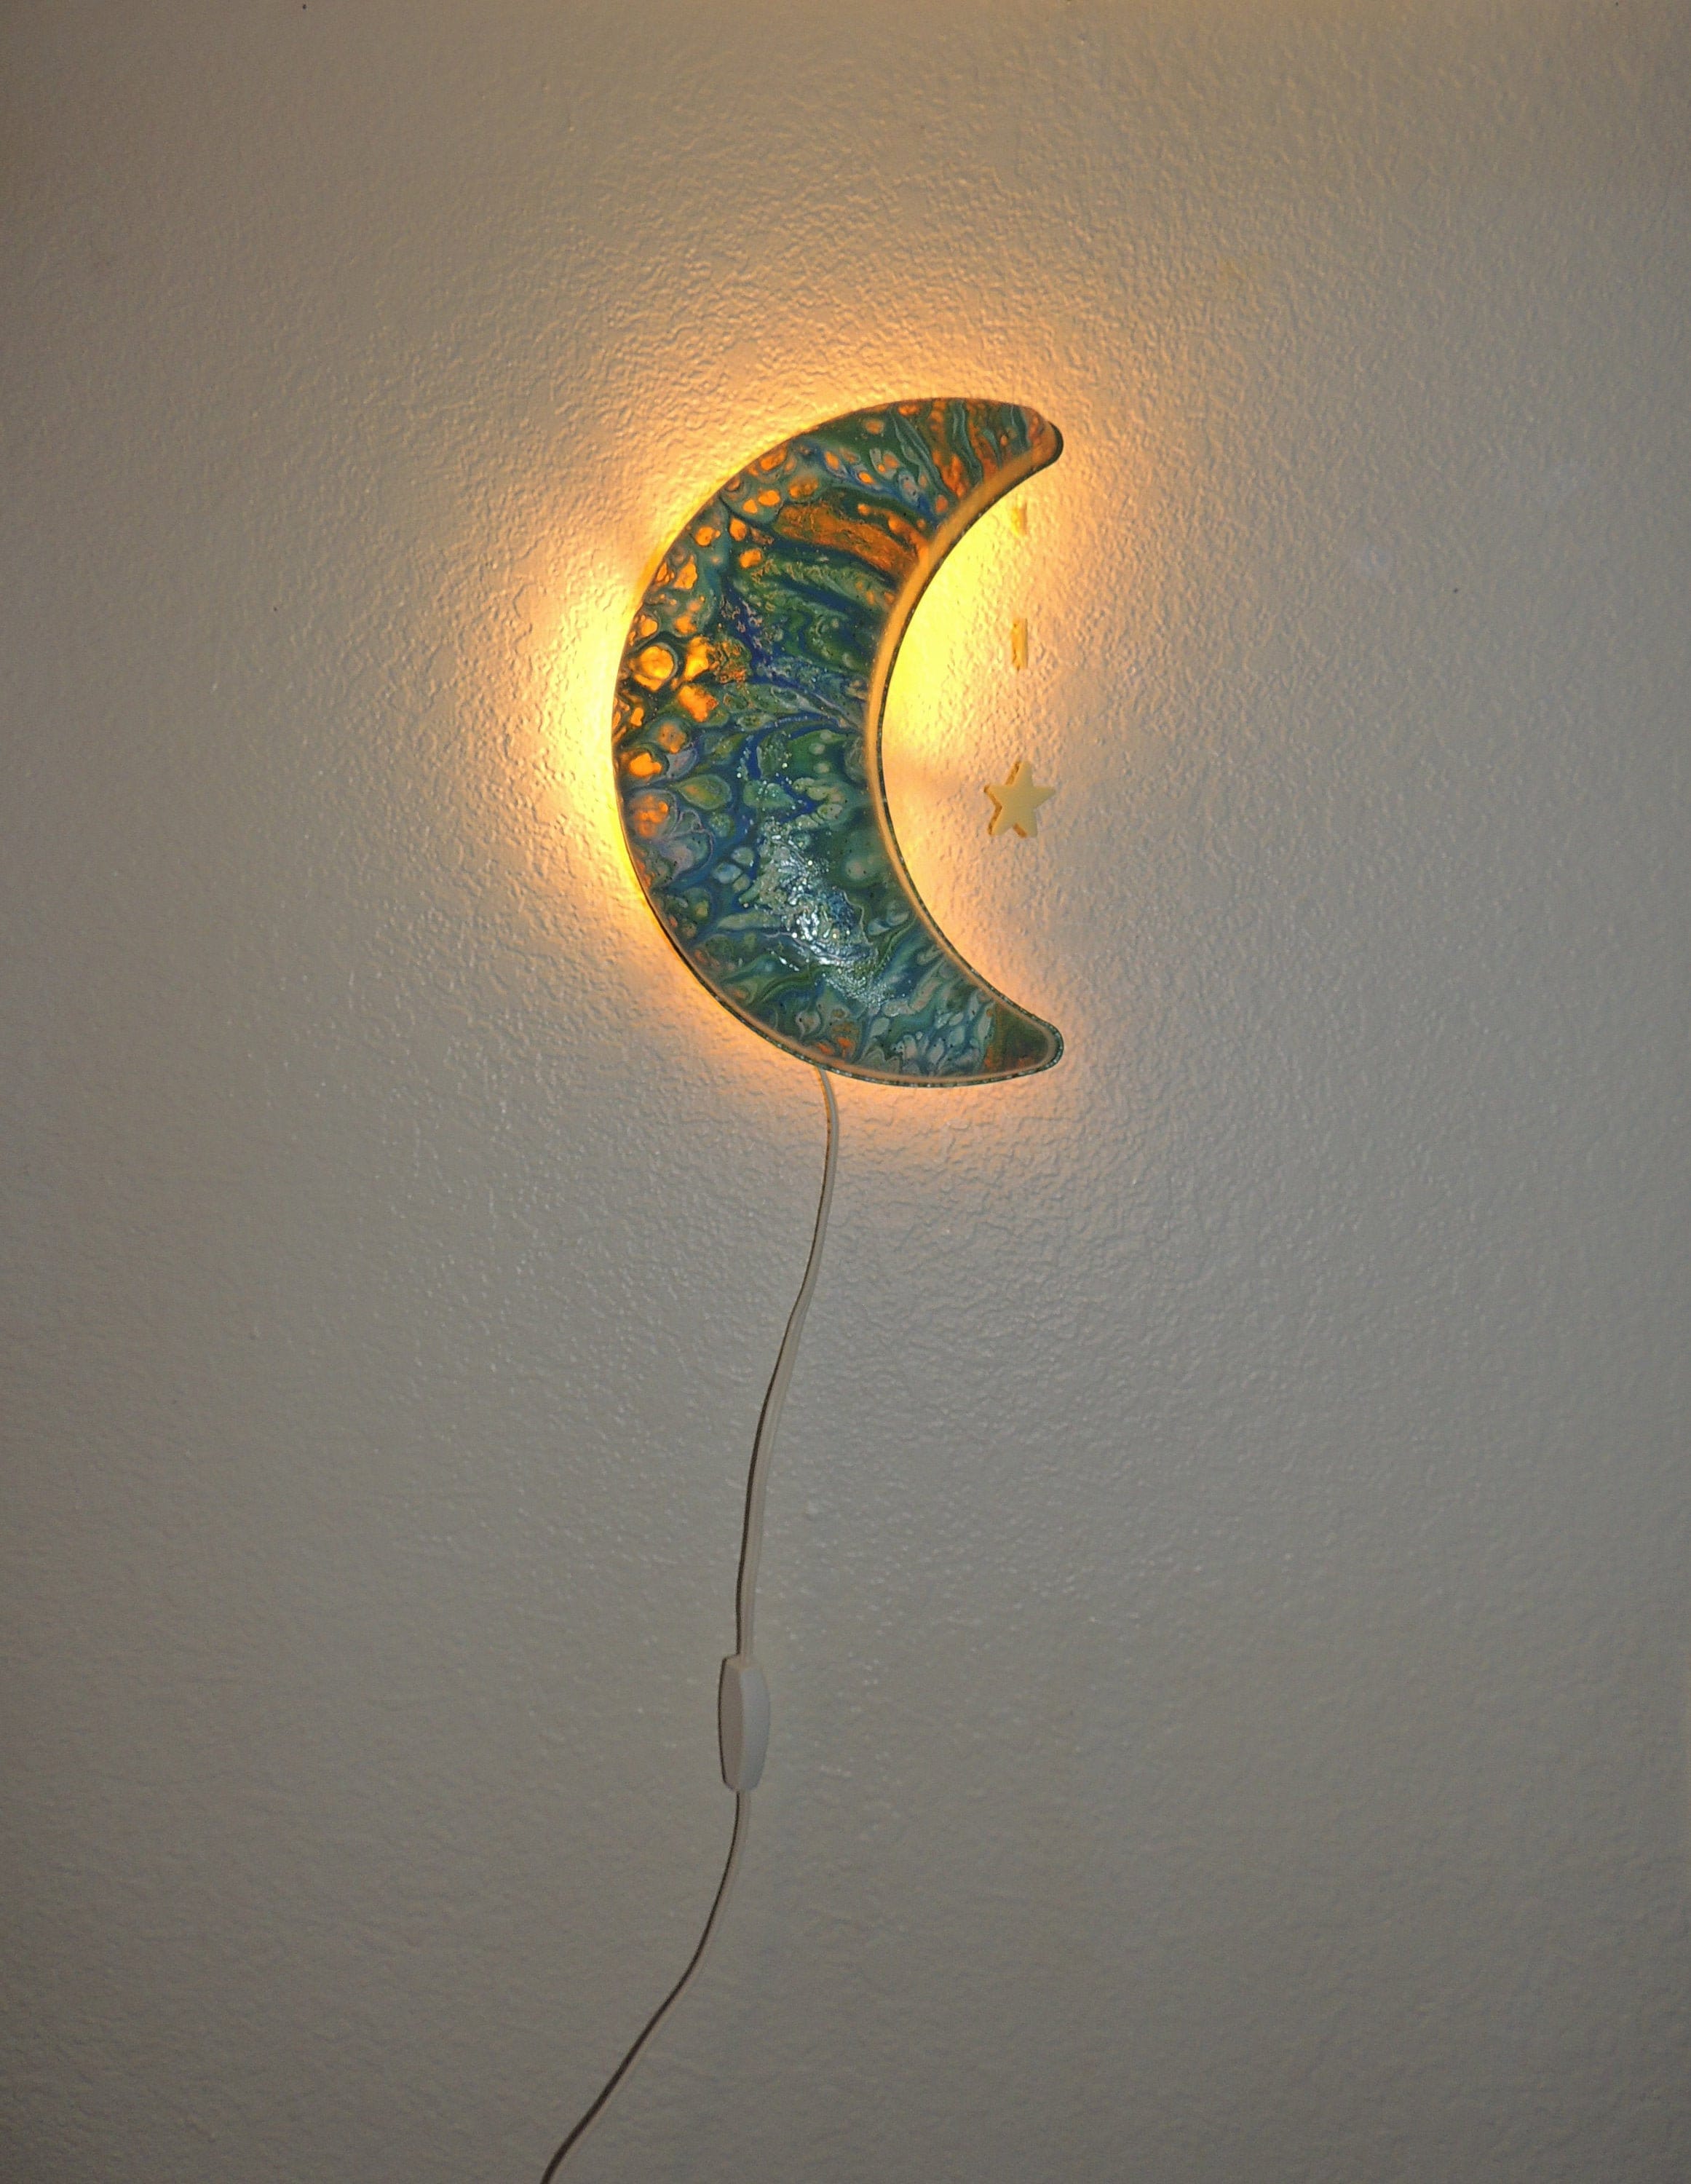 samtidig Sanktion Formode Up Cycled IKEA the Smila Moon Light Wall Hanging Cup Pour - Etsy